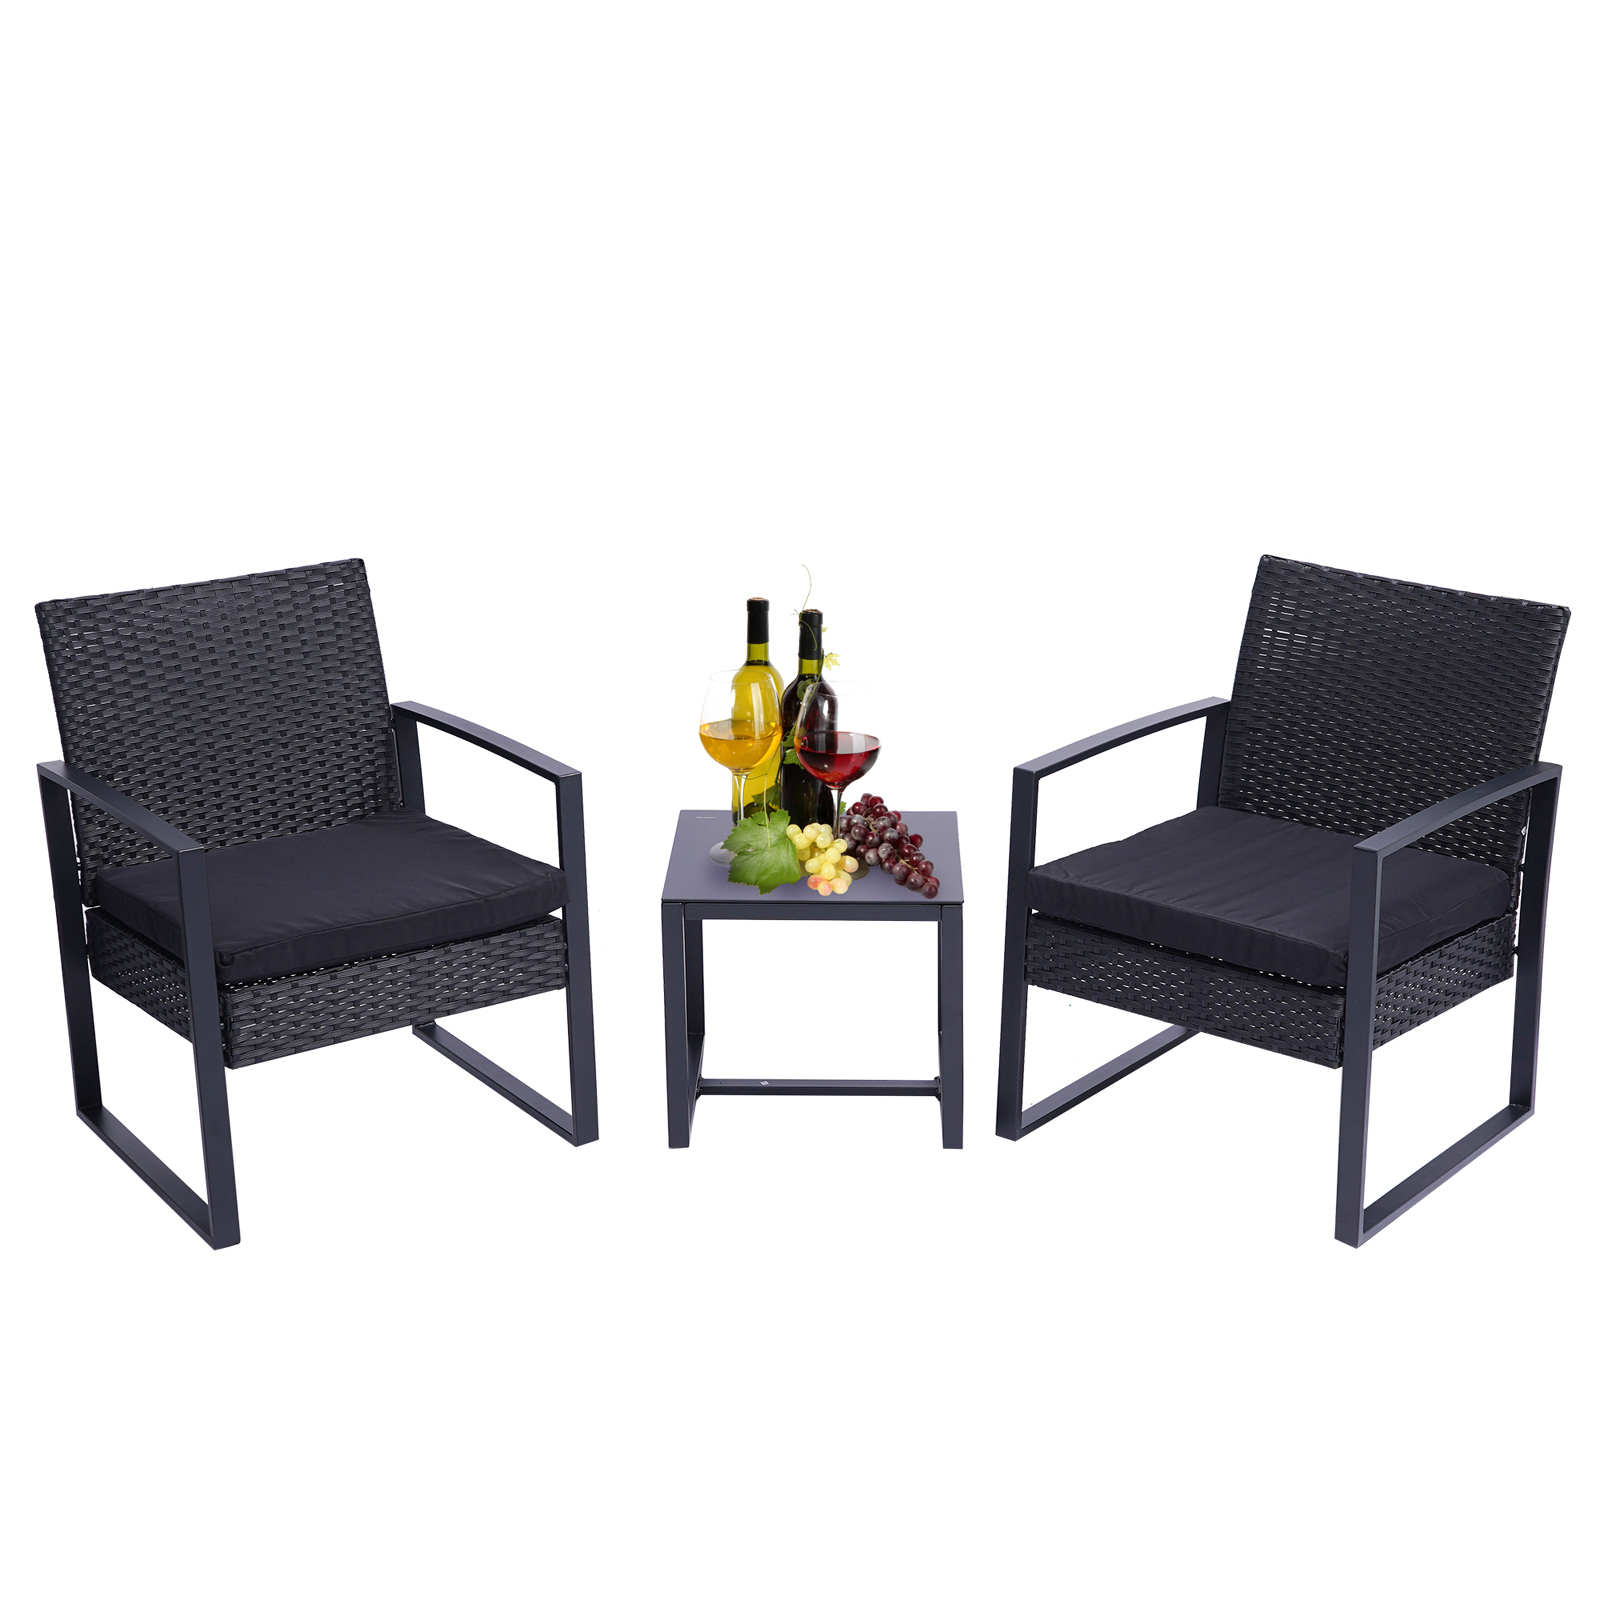 BTMWAY 3Piece Wicker Patio Furniture Set Cushioned PE Rattan Bistro Chairs Set, Outdoor Rattan Conversation Set with Coffee Table, Small Patio Cushioned Chairs and Table Set, A7154 - image 1 of 7